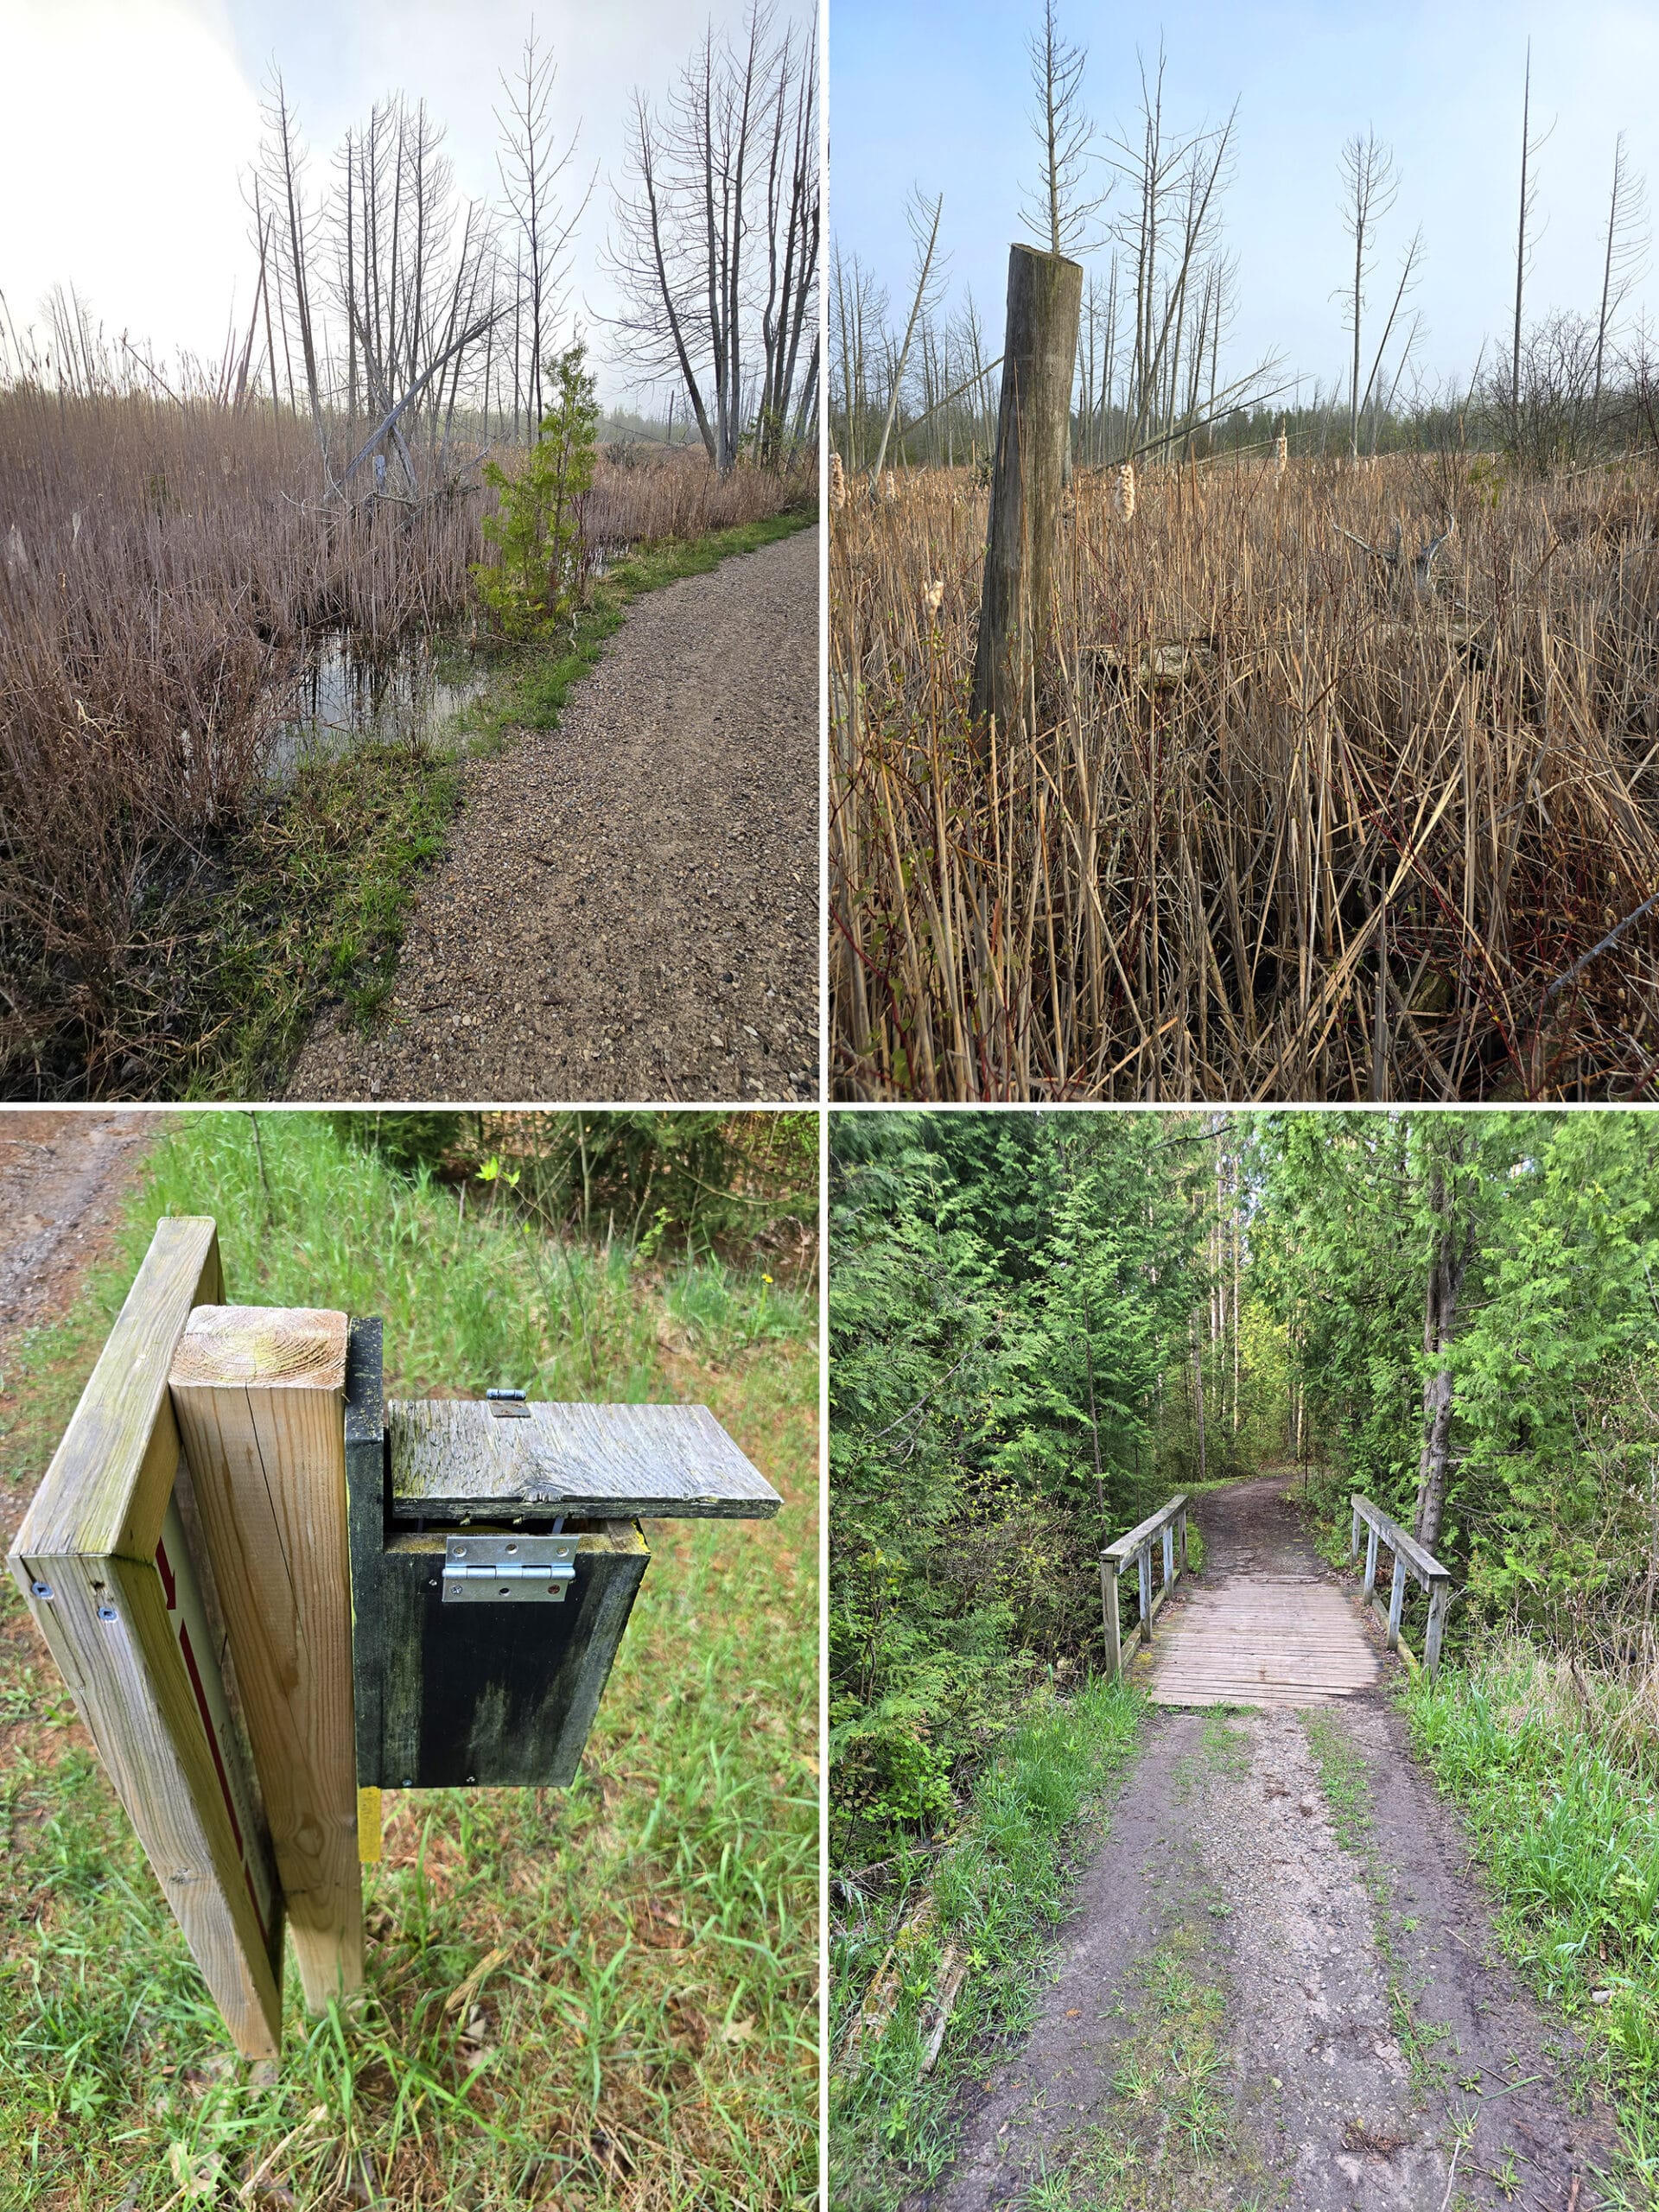 4 part image showing various views of the Chain Trail in Inverhuron Provincial Park.